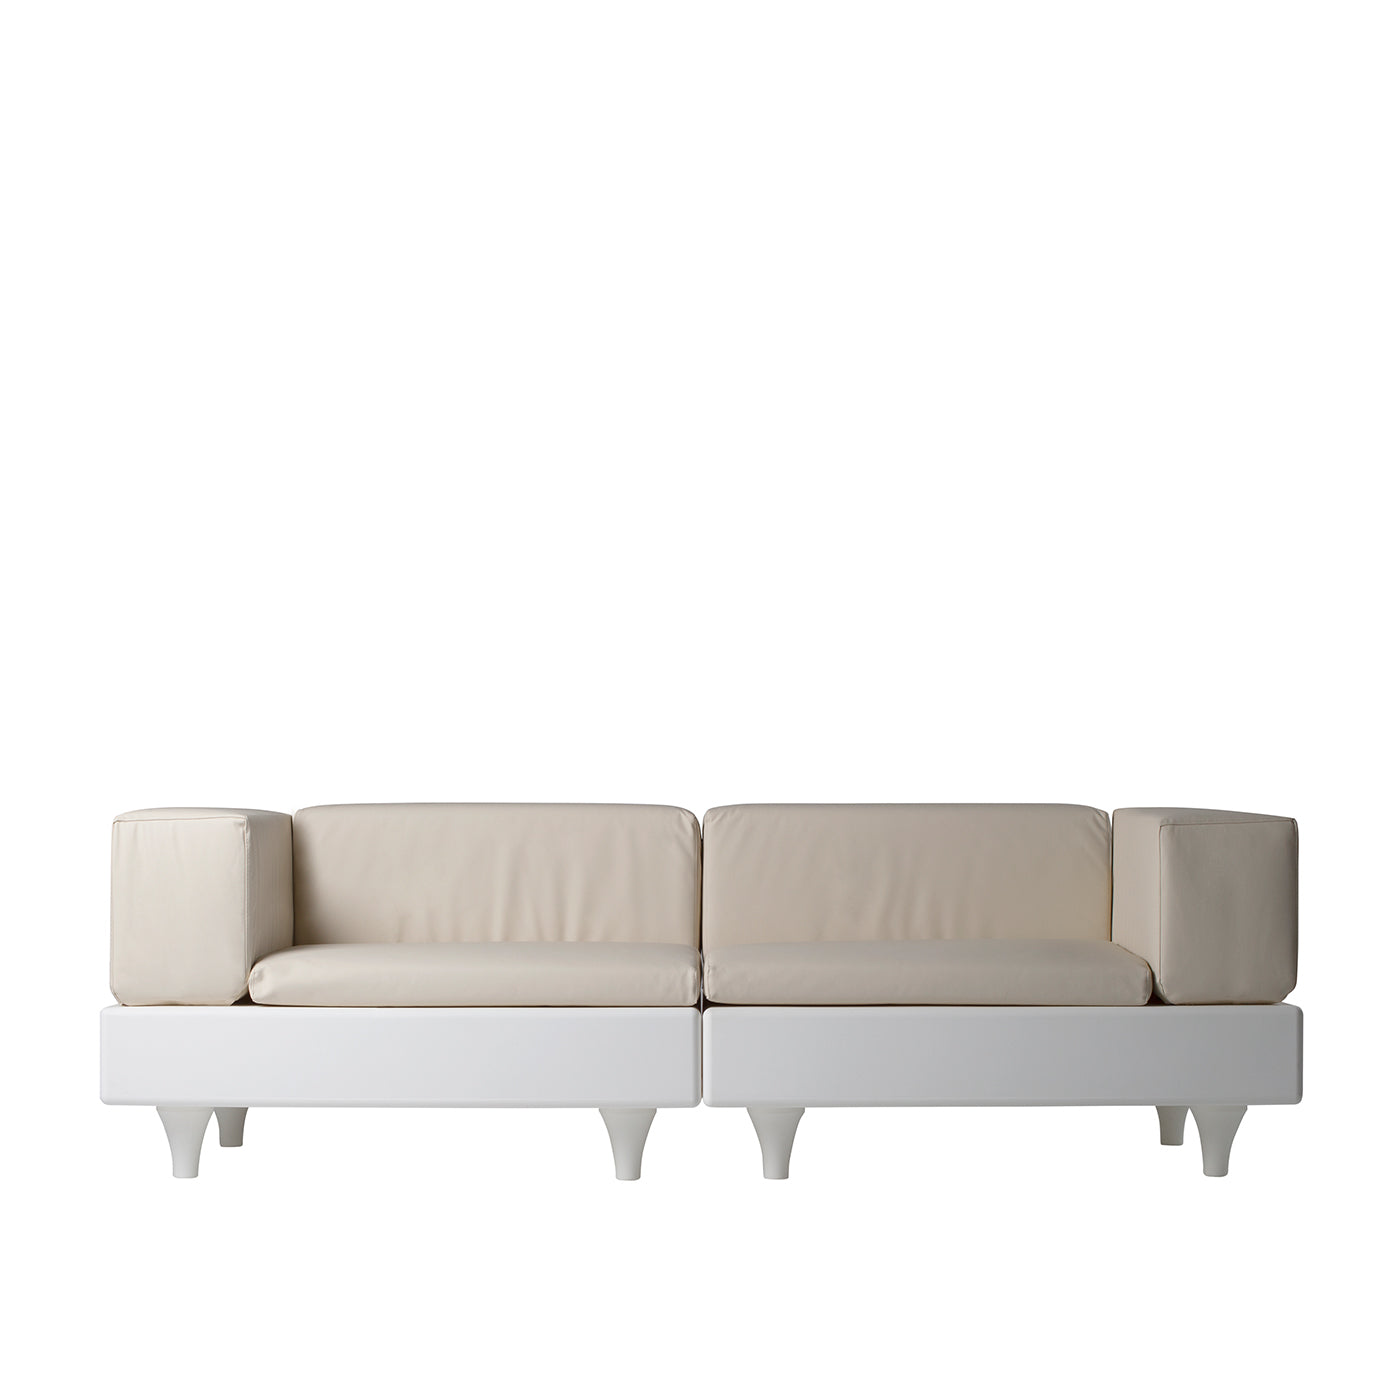 Happylife 2-Seater White and Beige Sofa - Alternative view 2